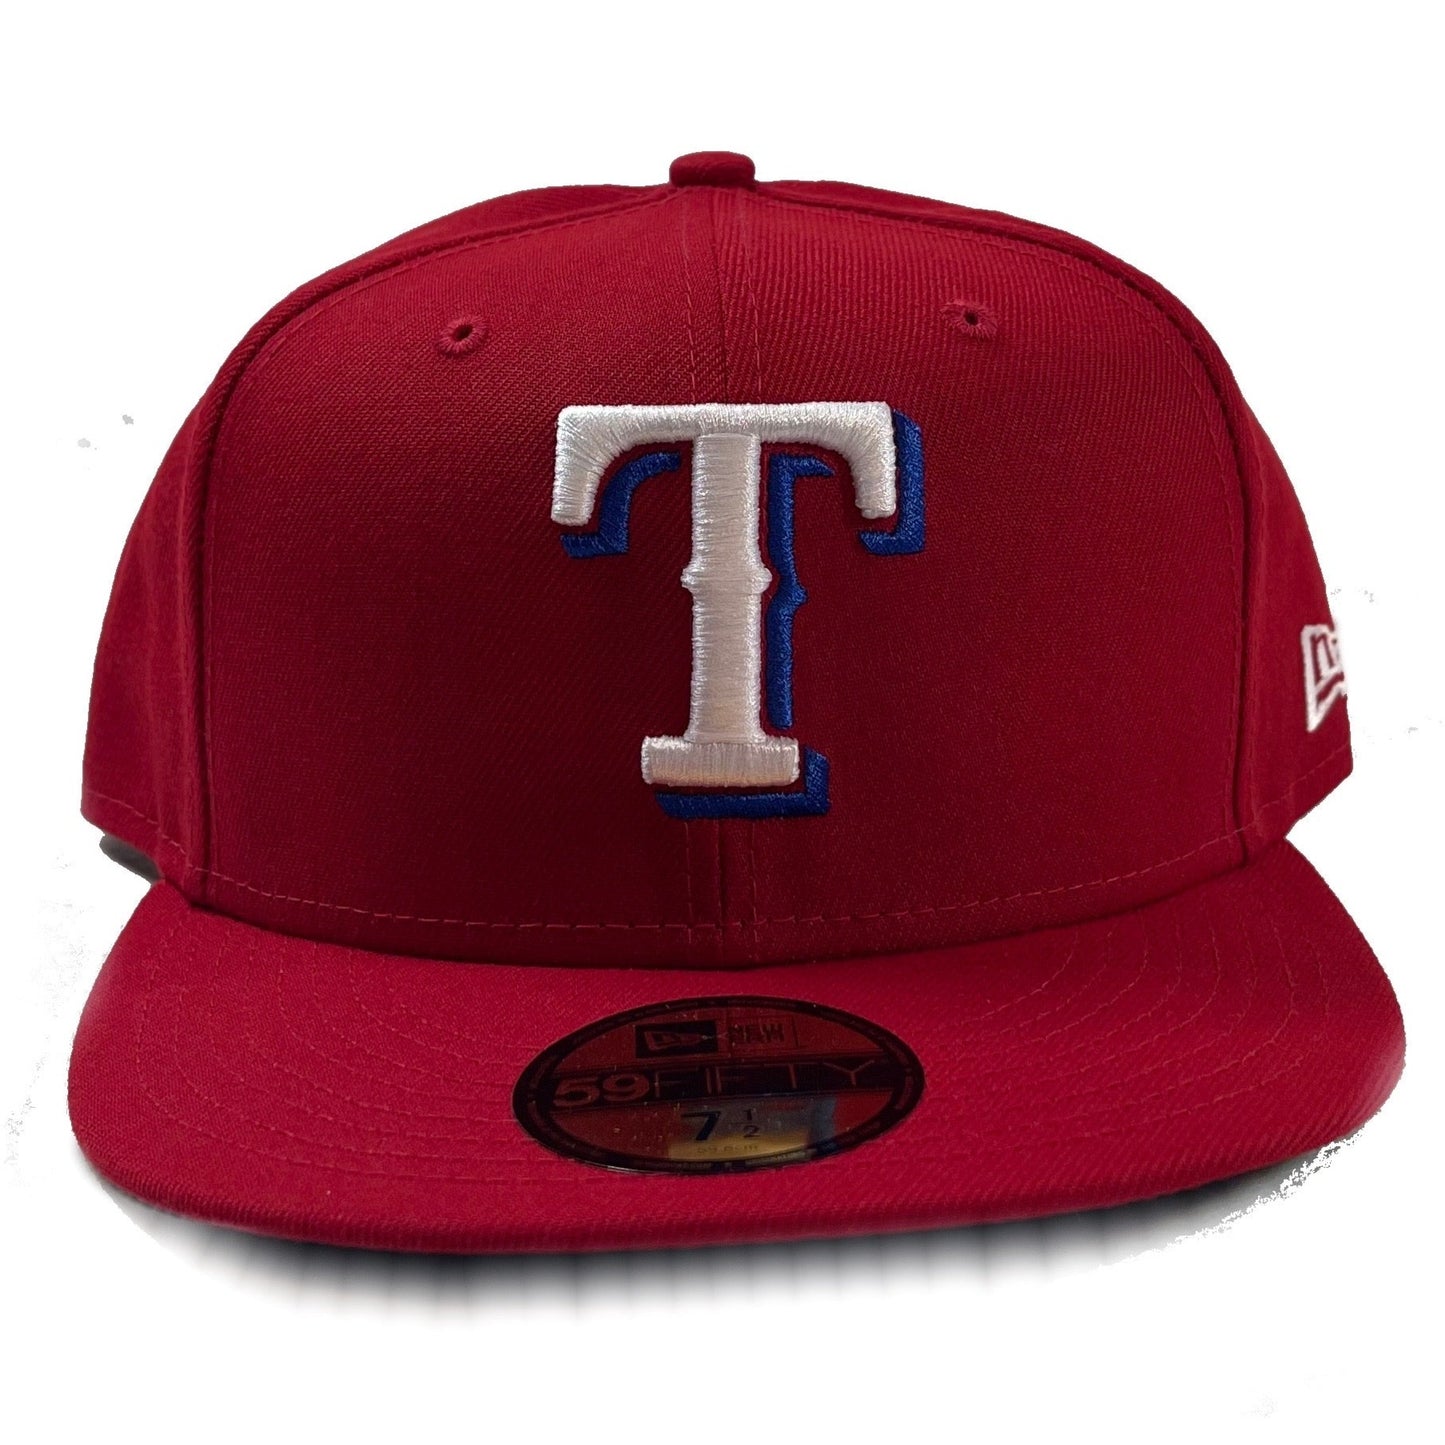 Texas Rangers (Red) Fitted